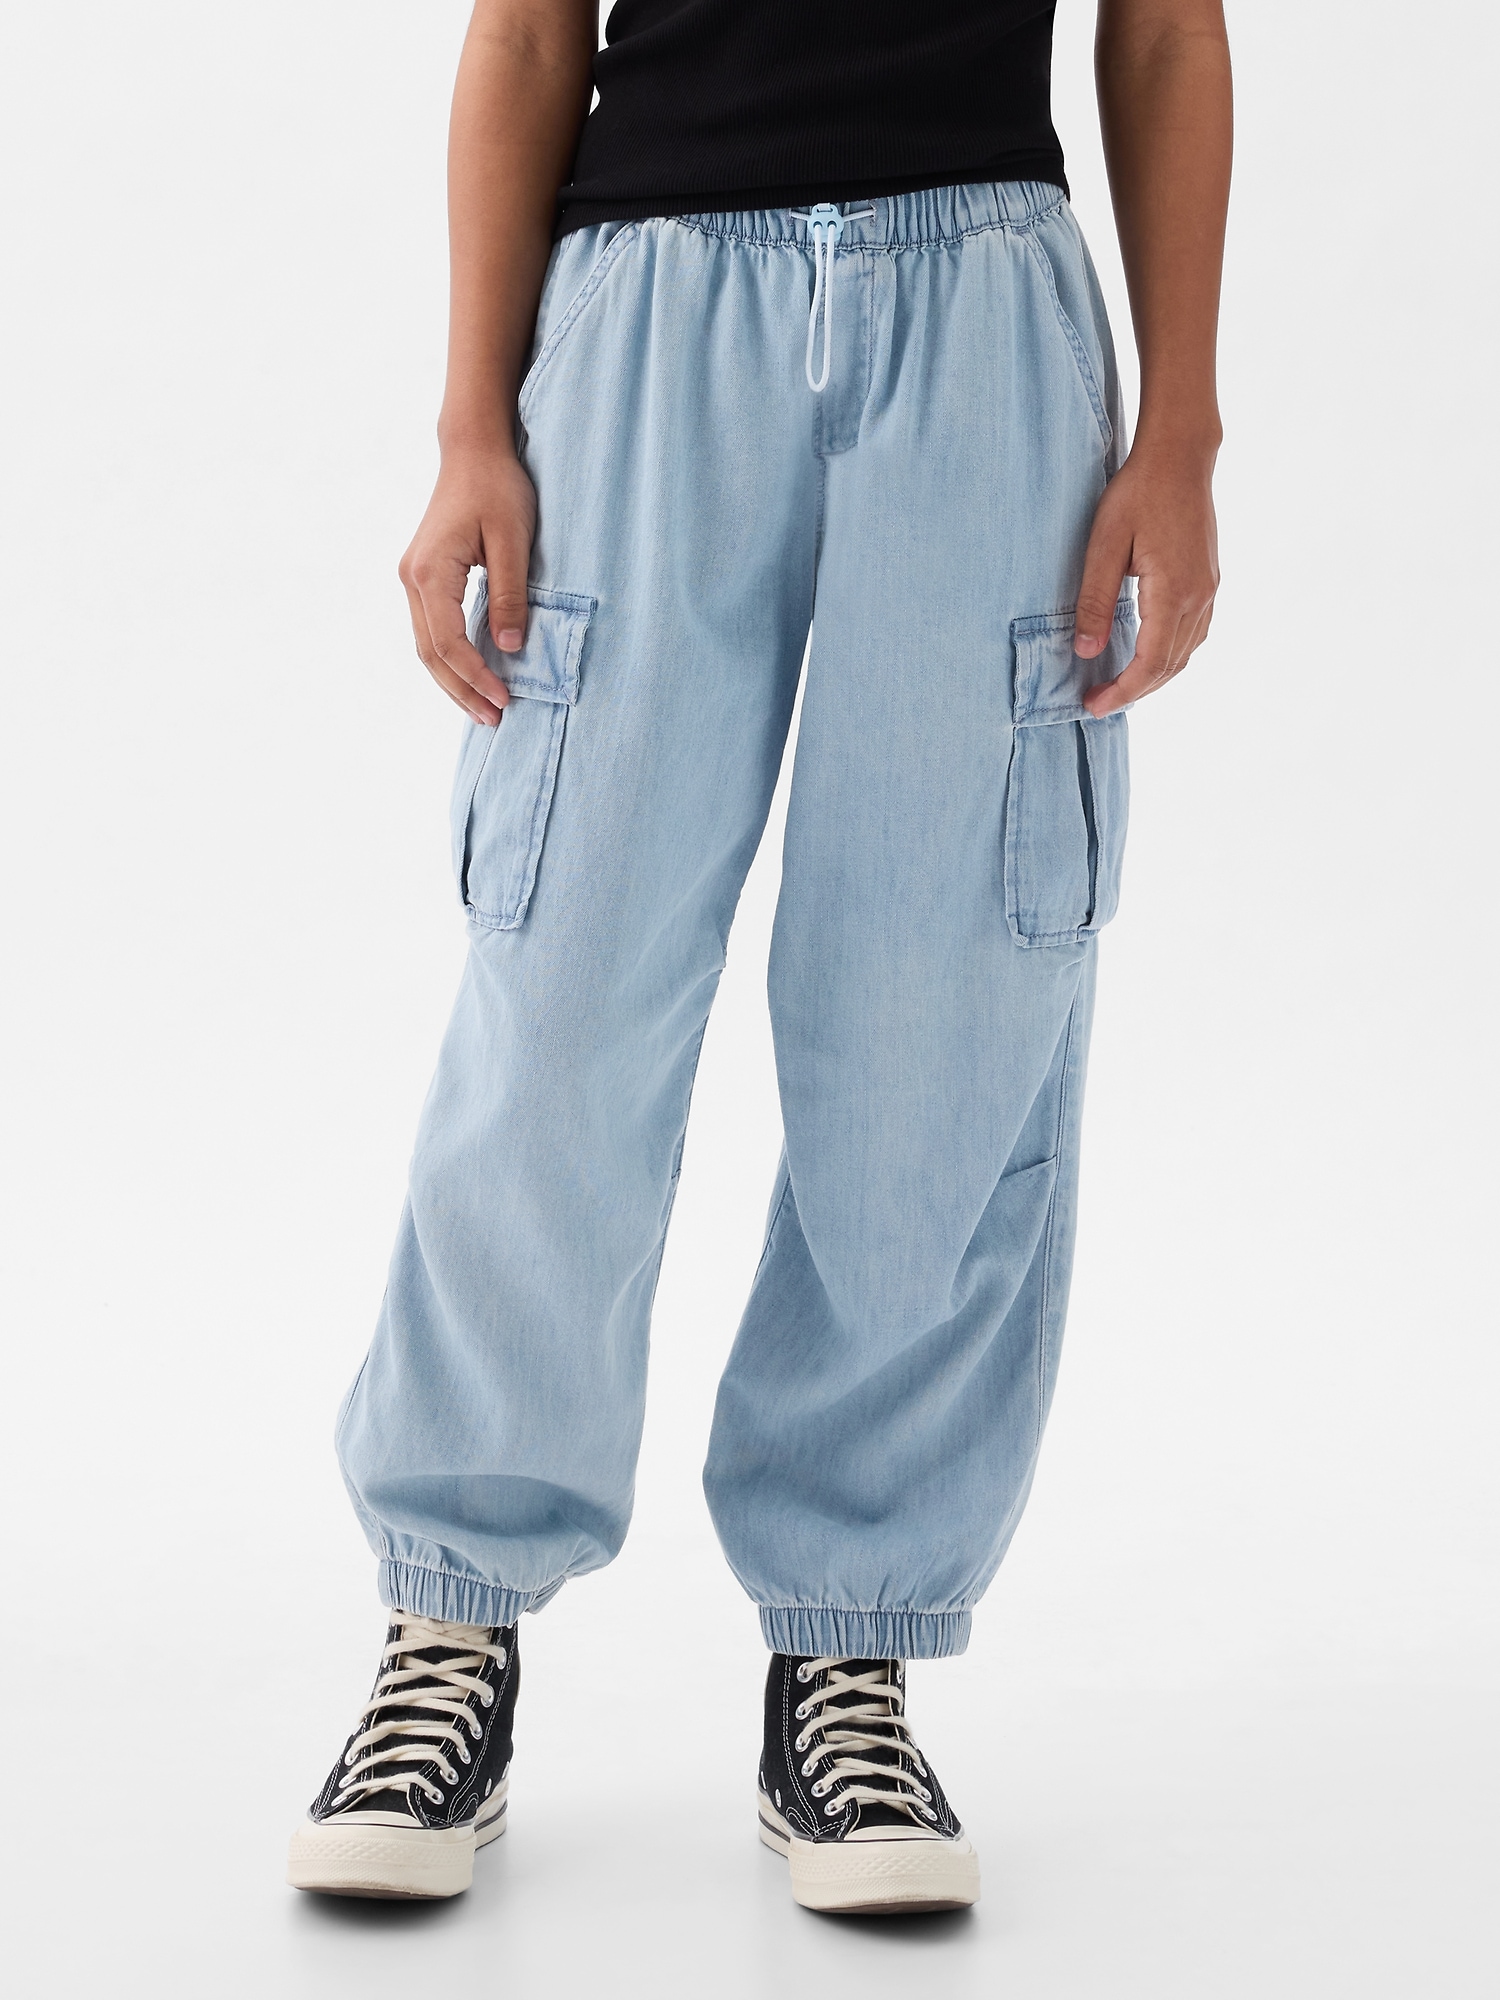 The best parachute pants to shop now: Urban Outfitters, H&M, more - Reviewed